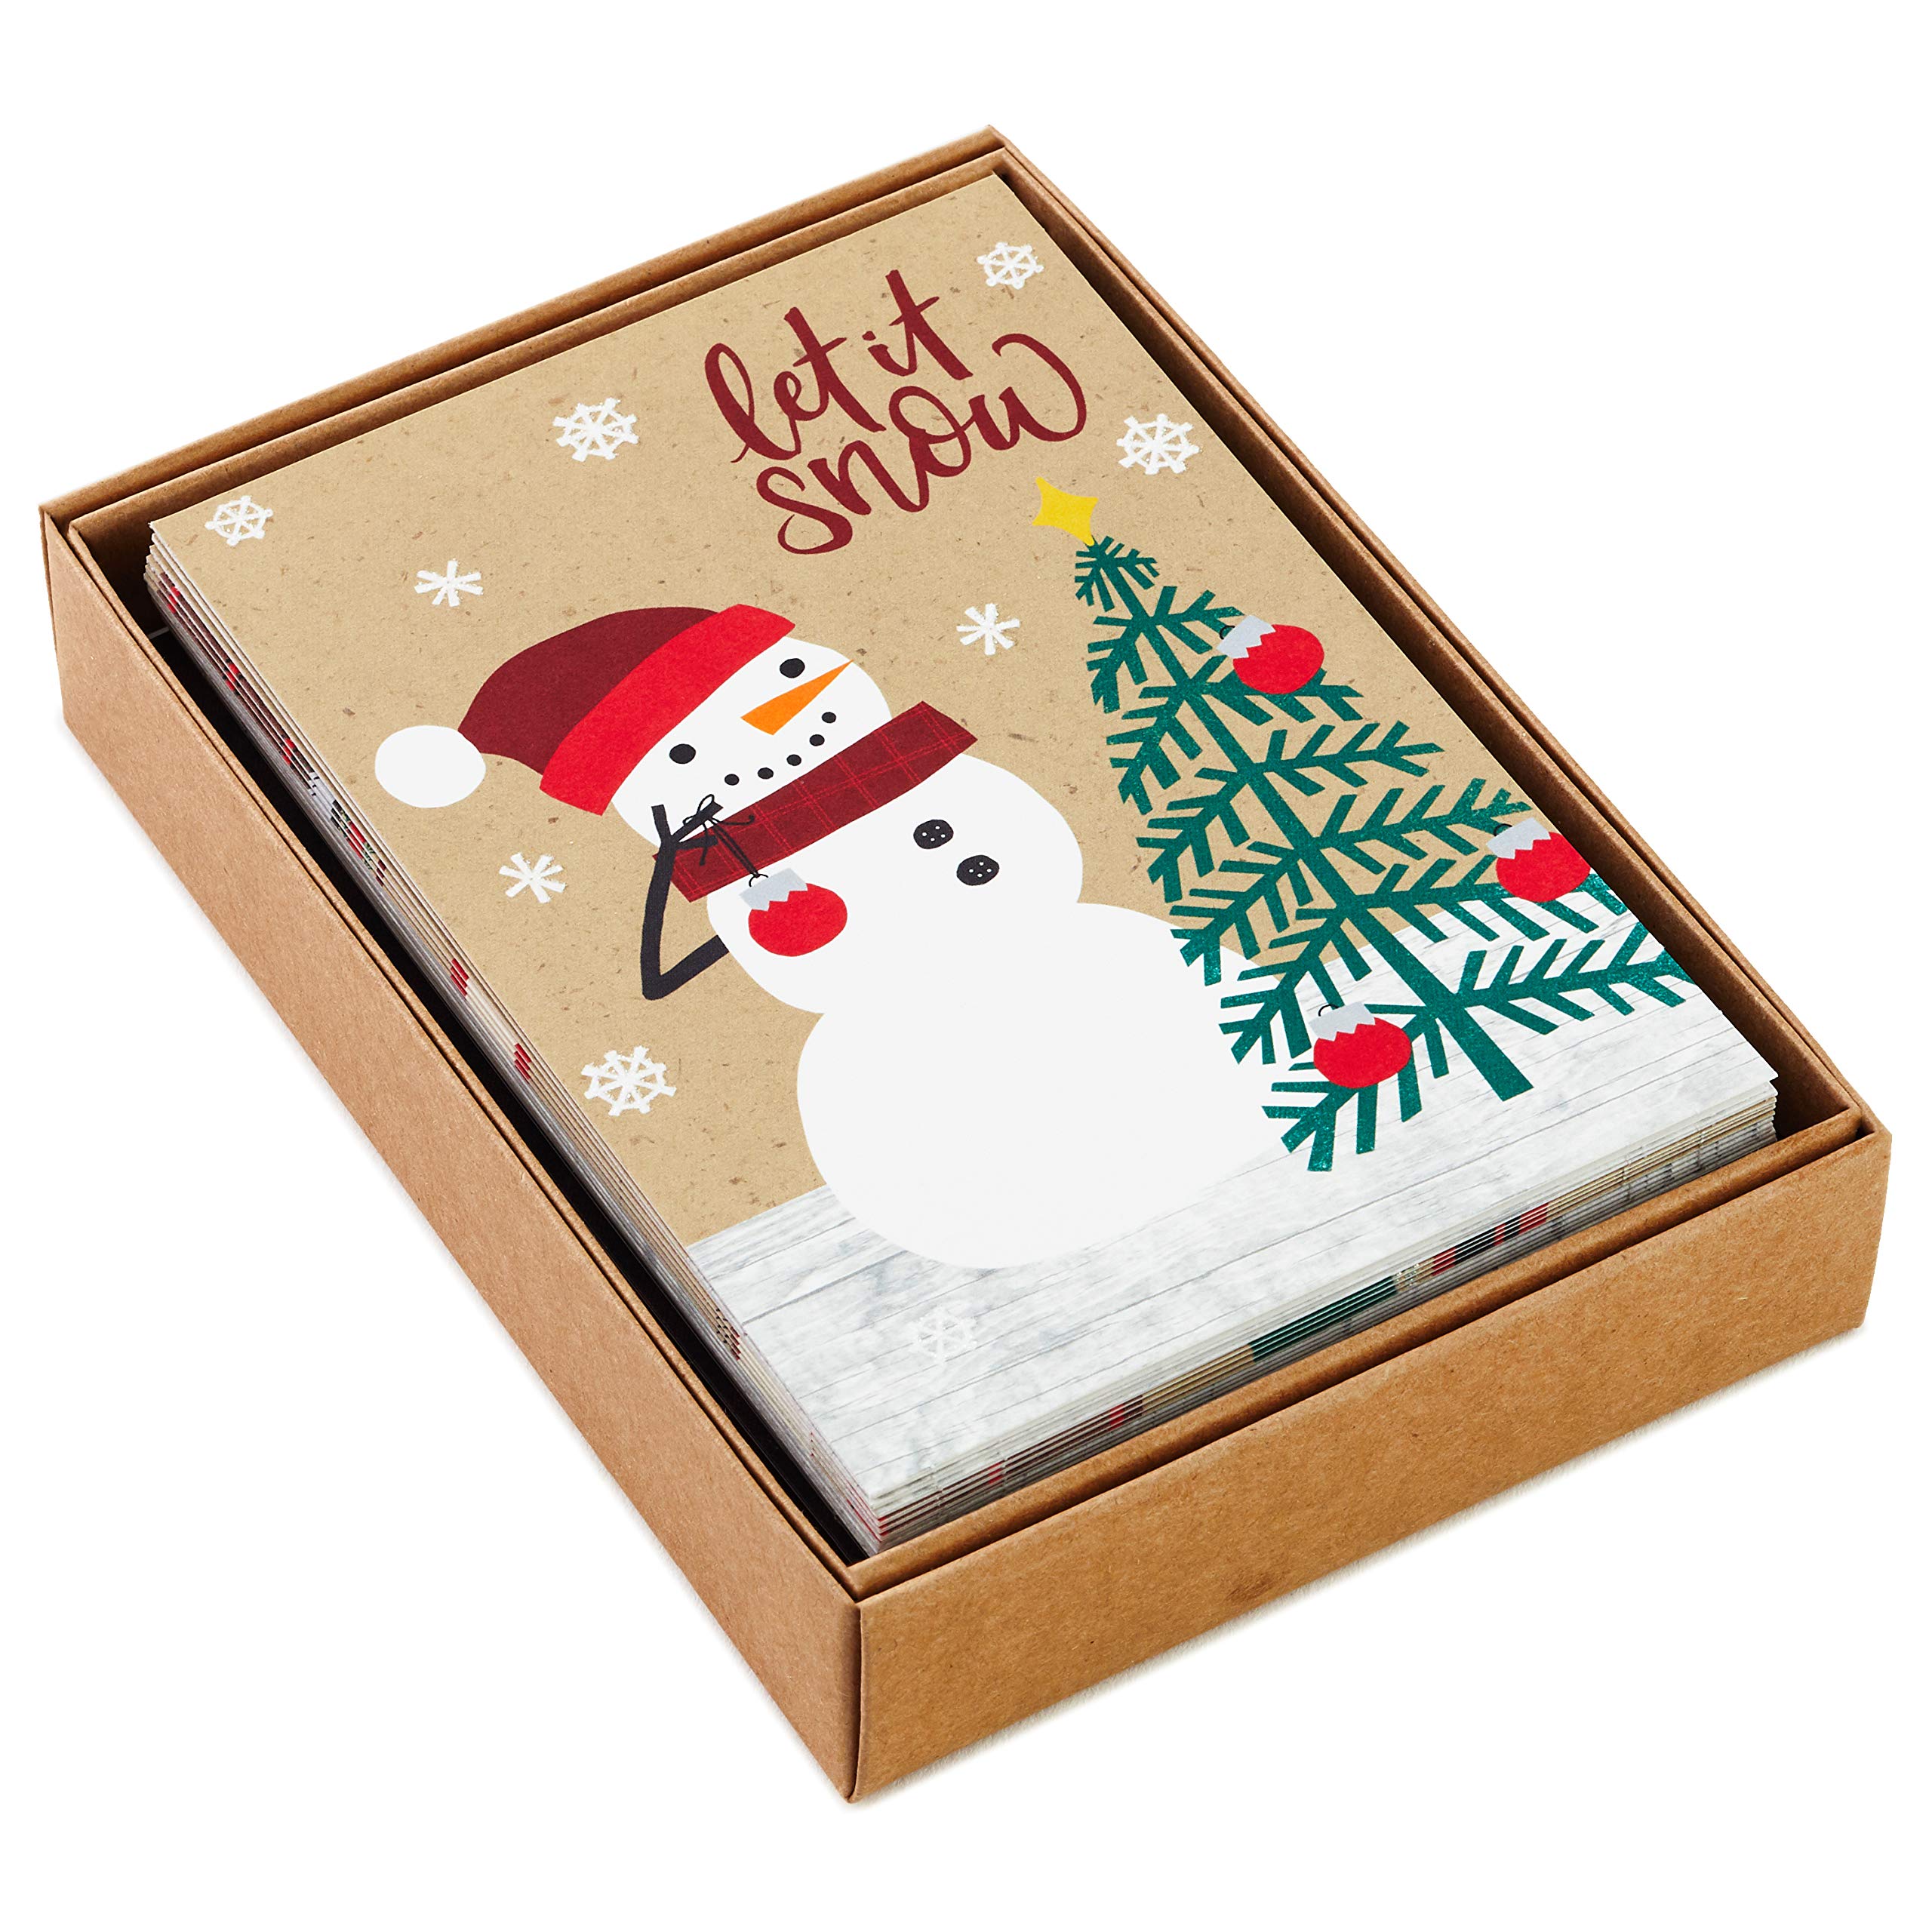 Hallmark Boxed Christmas Cards Assortment, Rustic Holidays (6 Designs, 24 Cards with Envelopes)